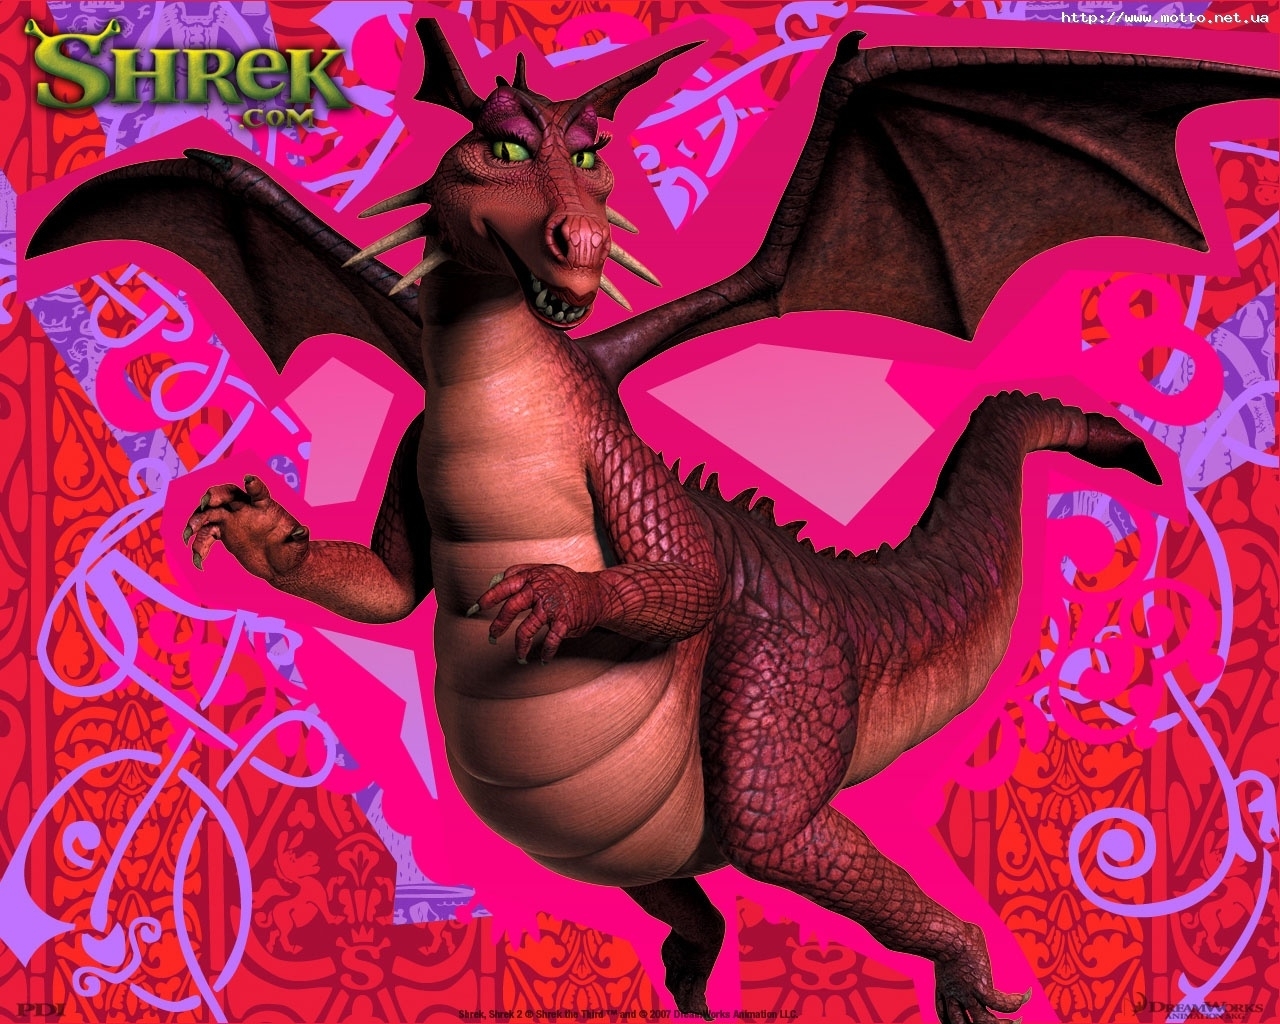 1831 free wallpaper 480x800 for phone, download images shrek, cartoon, red, dragons 480x800 for mobile